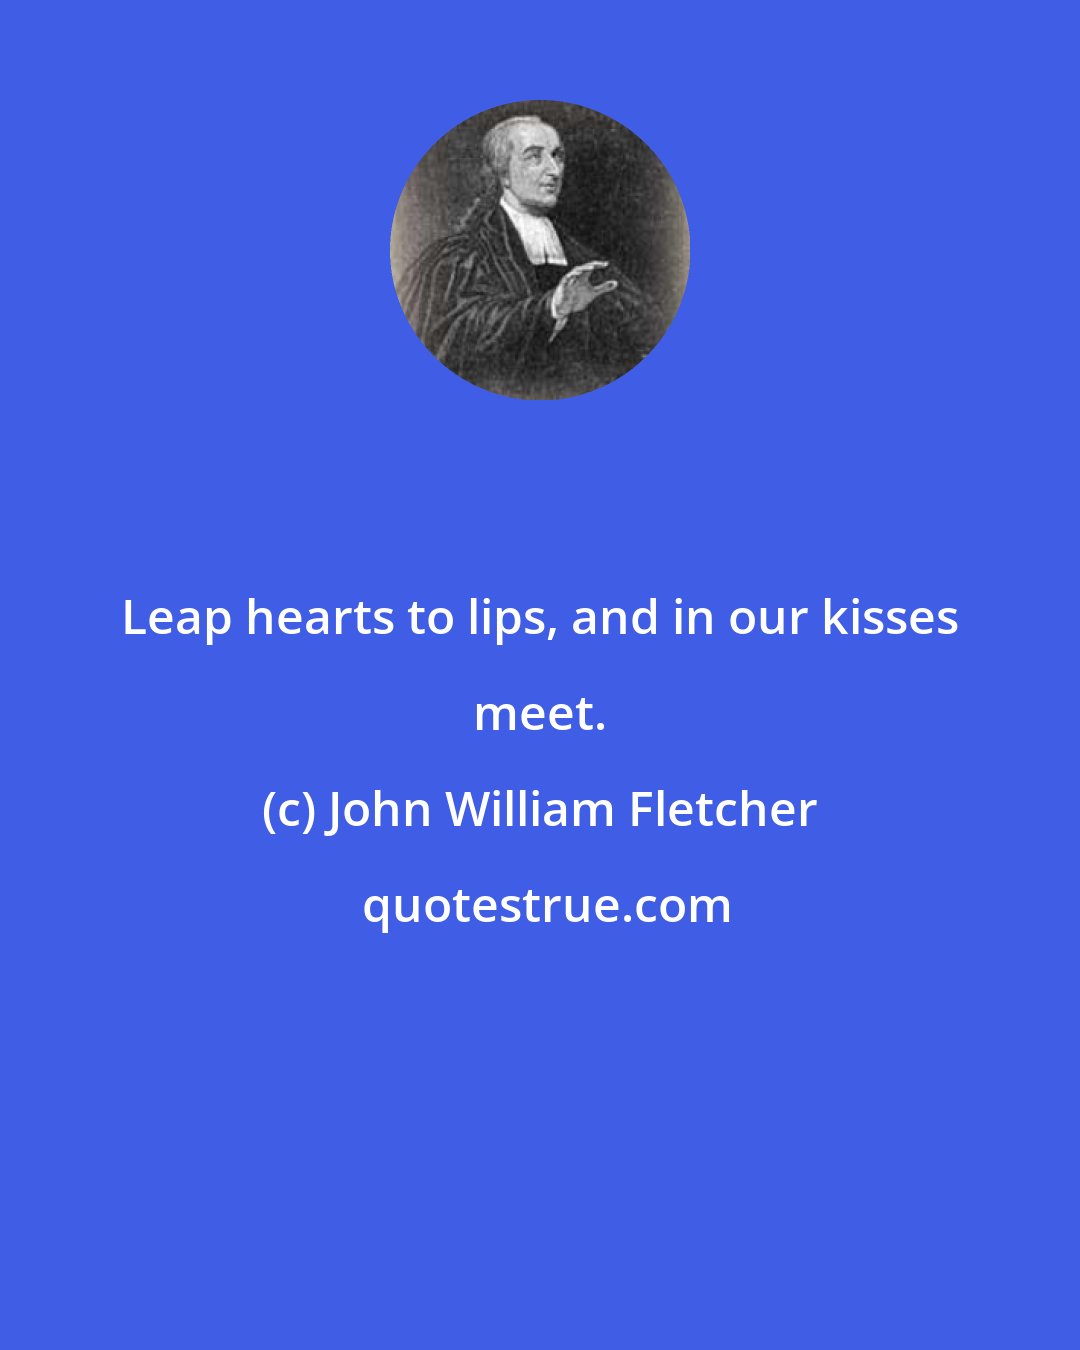 John William Fletcher: Leap hearts to lips, and in our kisses meet.